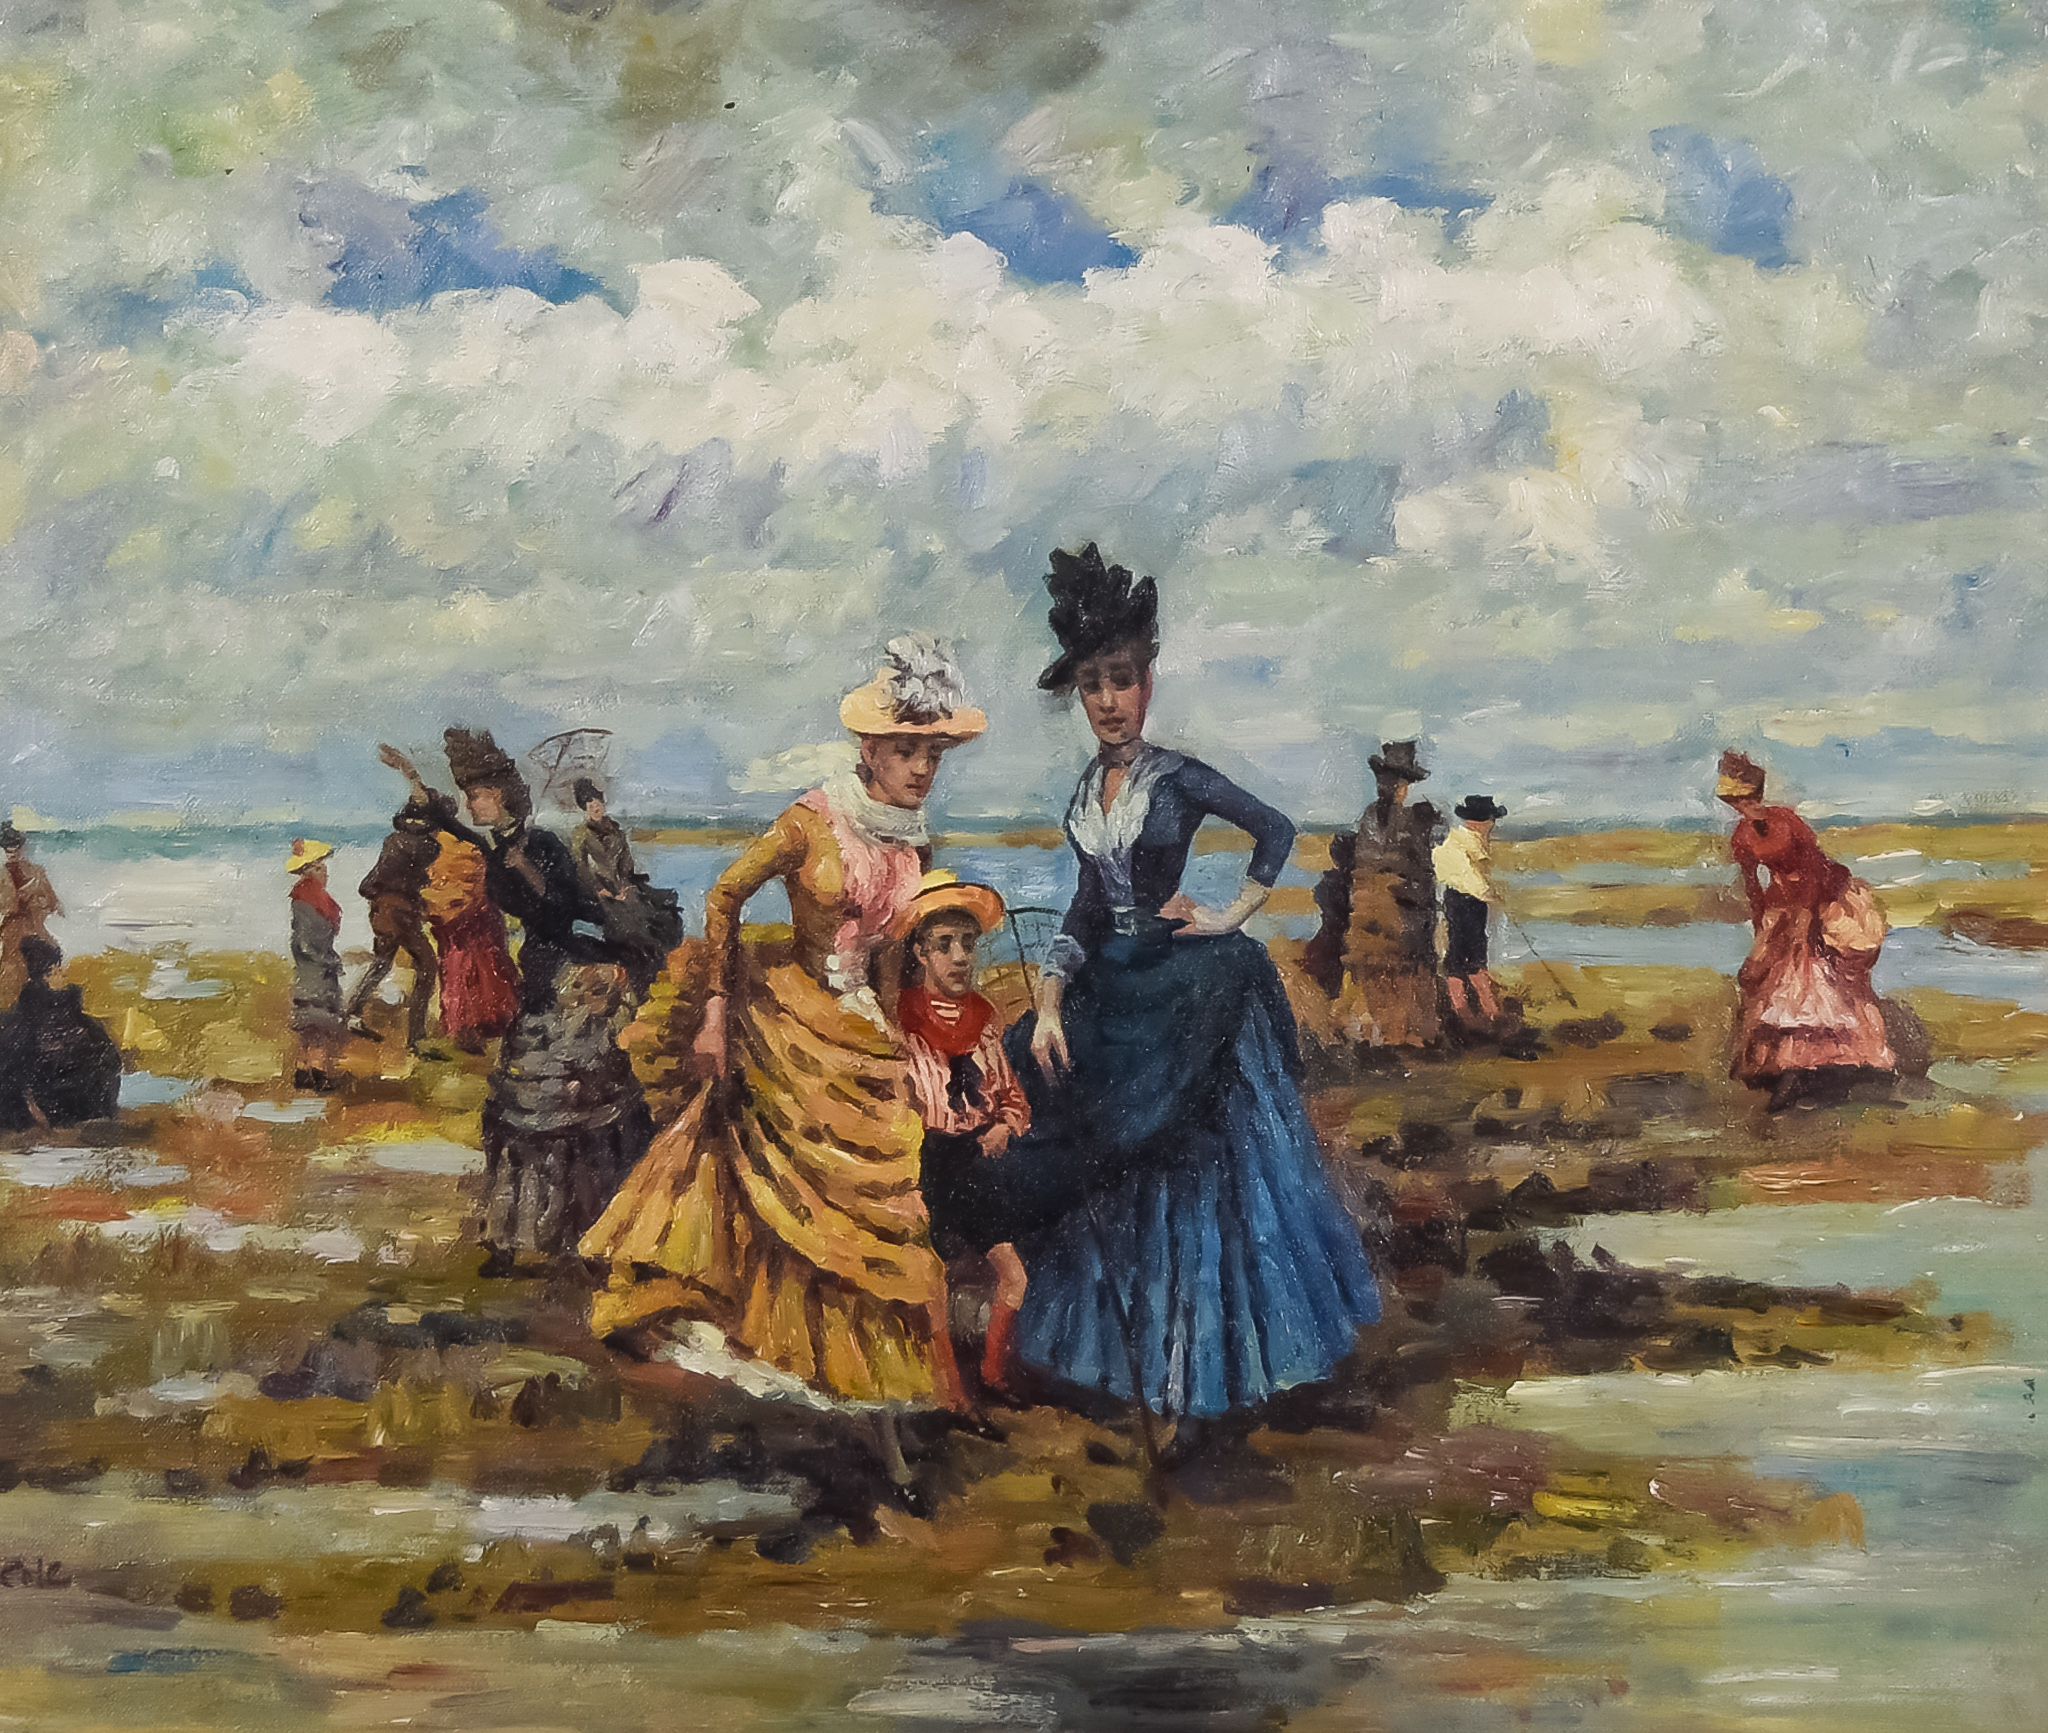 S Cole (Late 20th Century) - Oil painting - Figures in Edwardian dress, enjoying a day at the